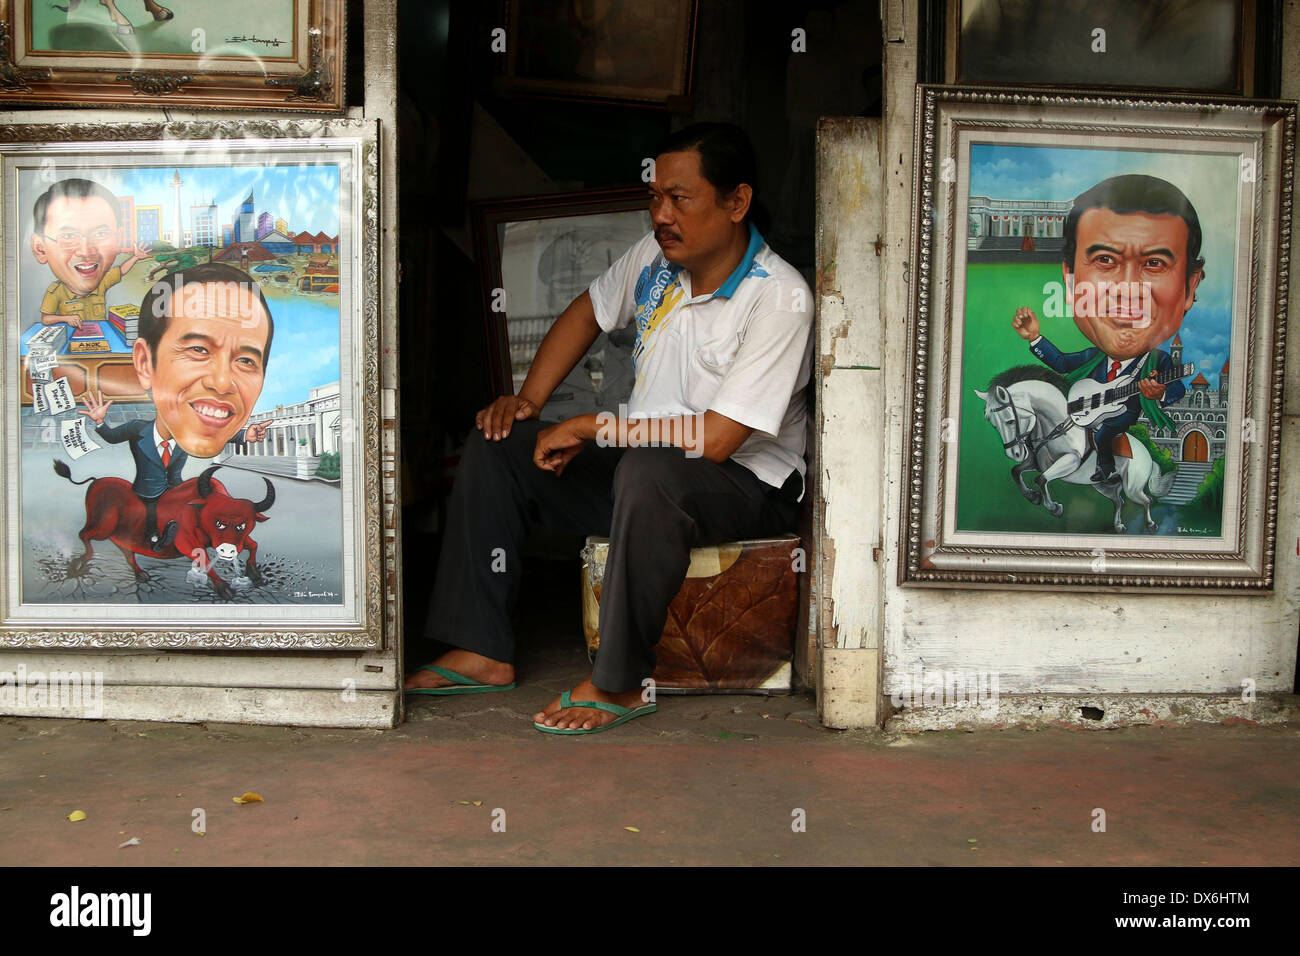 Jakarta, DKI Jakarta, Indonesia. 19th Mar, 2014. An artist painter sits near display of a painting of Jakarta Governor Joko Widodo( Left Below) and A Dangdut Musician, Rhoma Irama (Right Below) at Street Painting Shop Vendor in Jakarta. March 19, 2014 . Joko Widodo who is running for president for the Indonesian Democratic Party of Struggle (PDI-P) and Rhoma Irama a president candidate for the National Awakening Party (PKB). Credit:  Jeff Aries/ZUMAPRESS.com/Alamy Live News Stock Photo